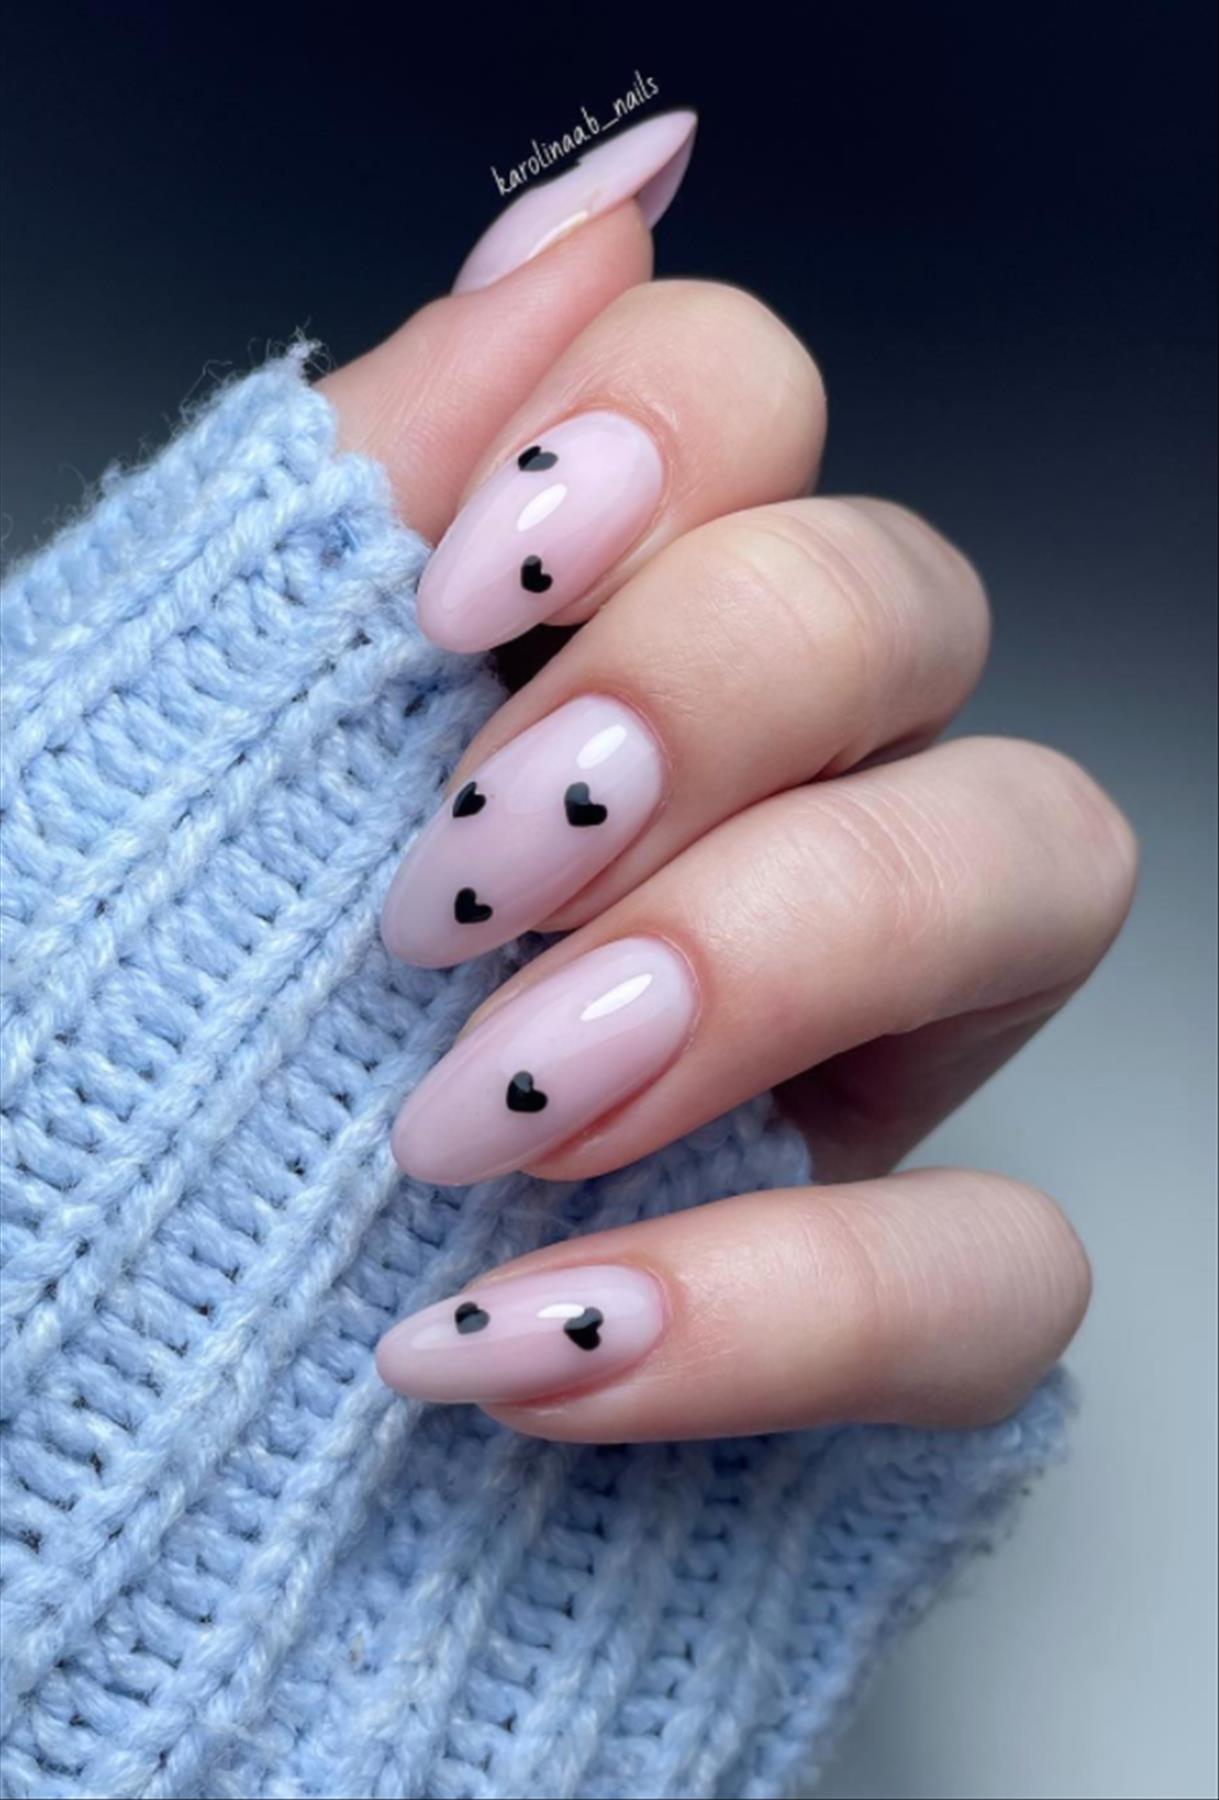 Trendy minimalist nails art for spring manicures